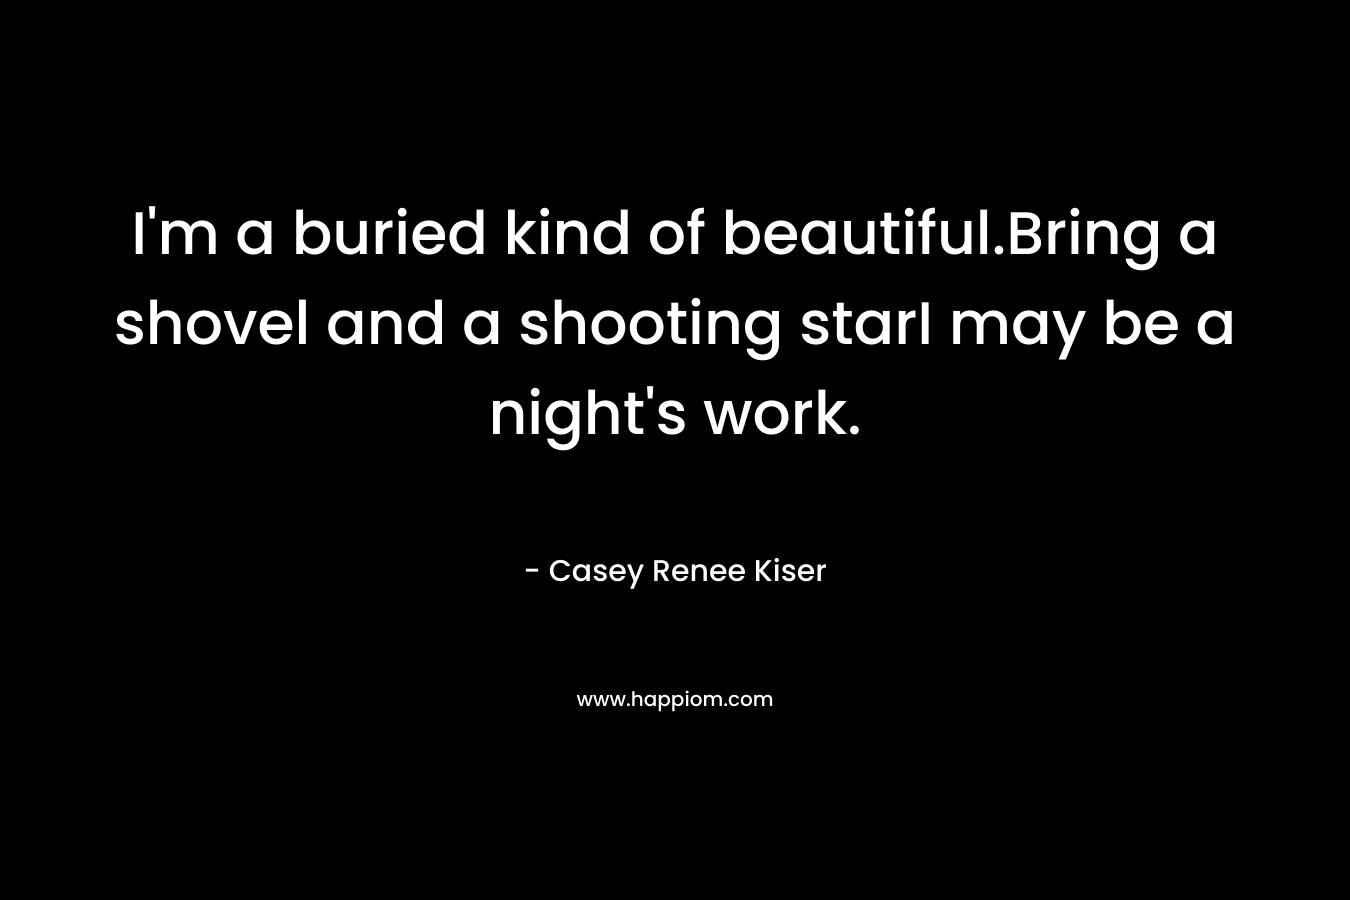 I’m a buried kind of beautiful.Bring a shovel and a shooting starI may be a night’s work. – Casey Renee Kiser